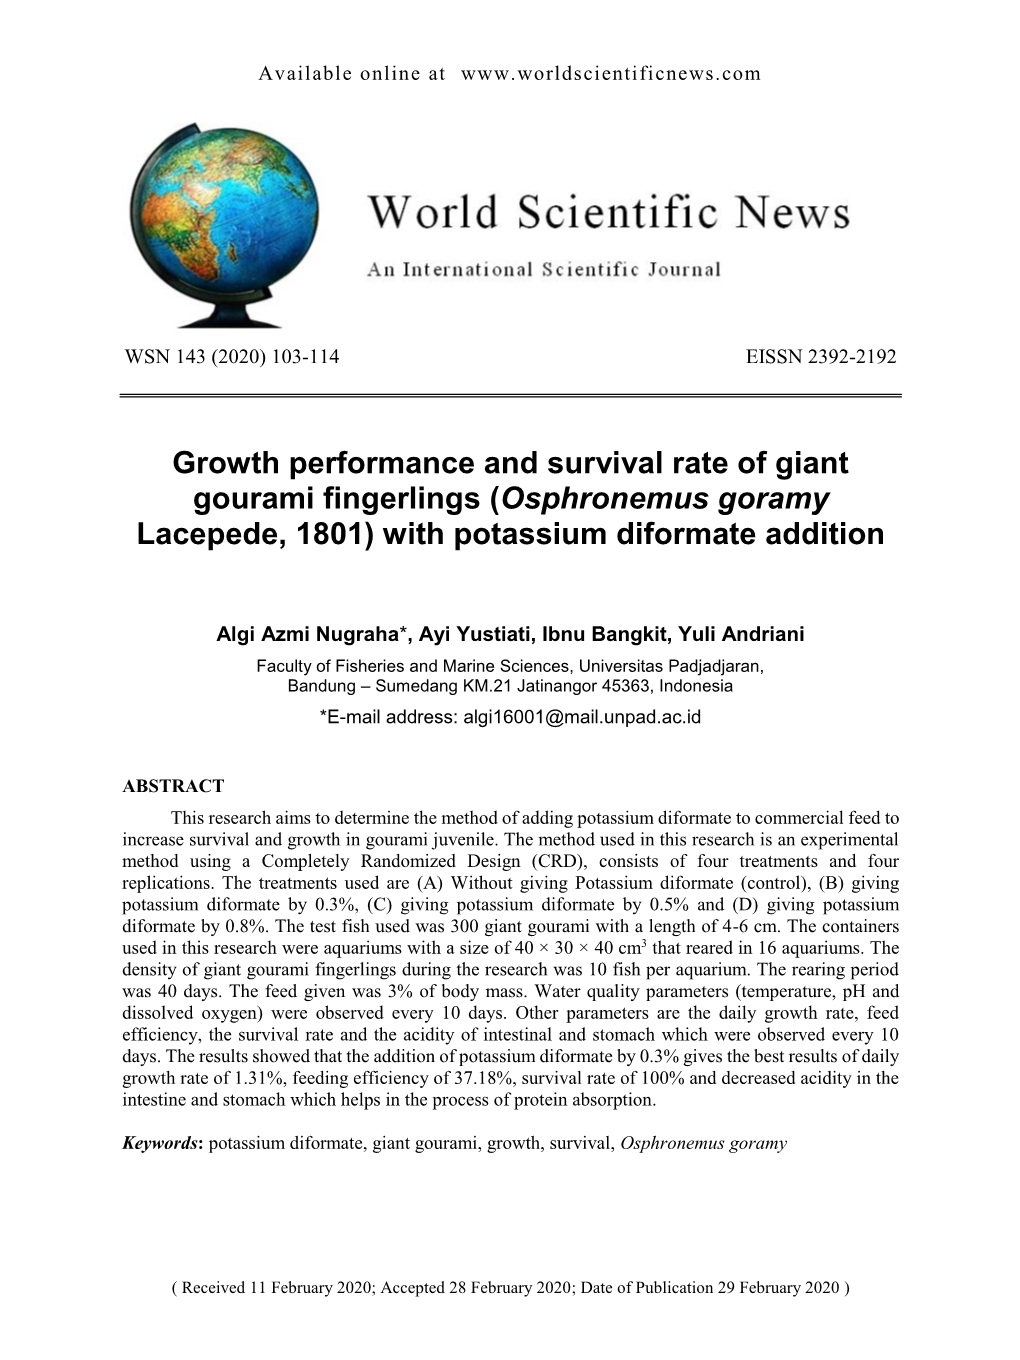 Growth Performance and Survival Rate of Giant Gourami Fingerlings (Osphronemus Goramy Lacepede, 1801) with Potassium Diformate Addition